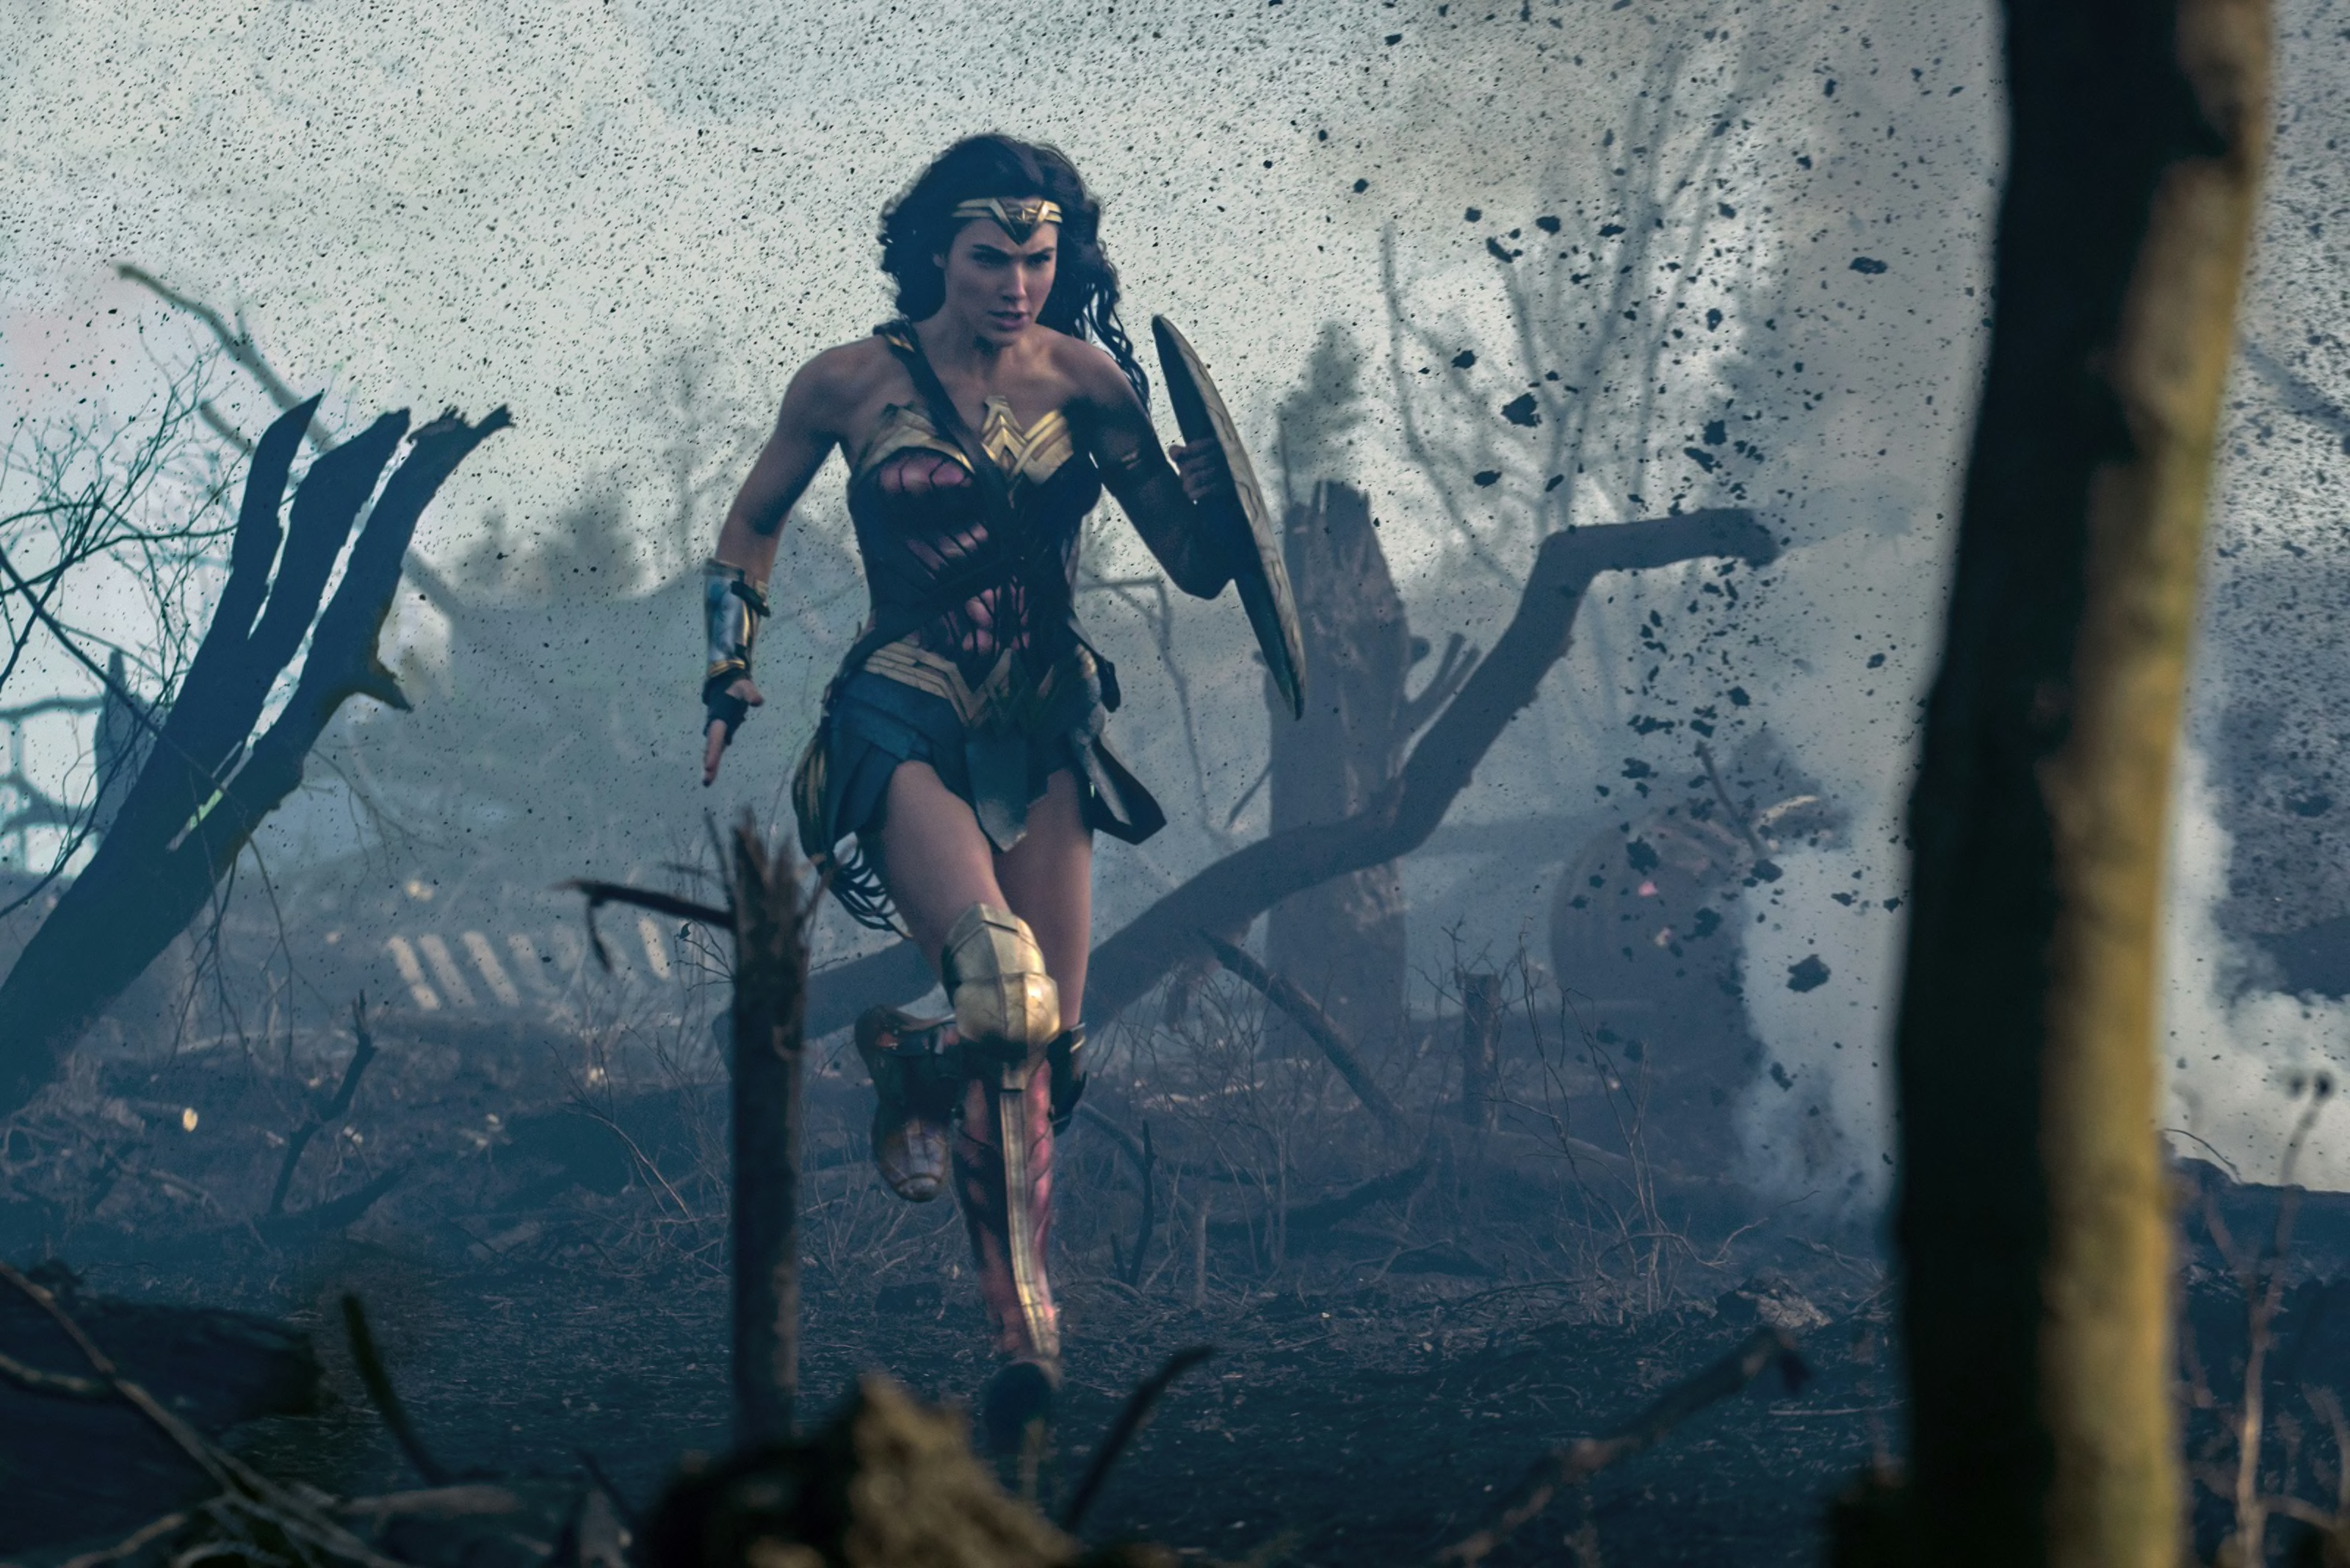 Everything We Know About 'Wonder Woman 1984